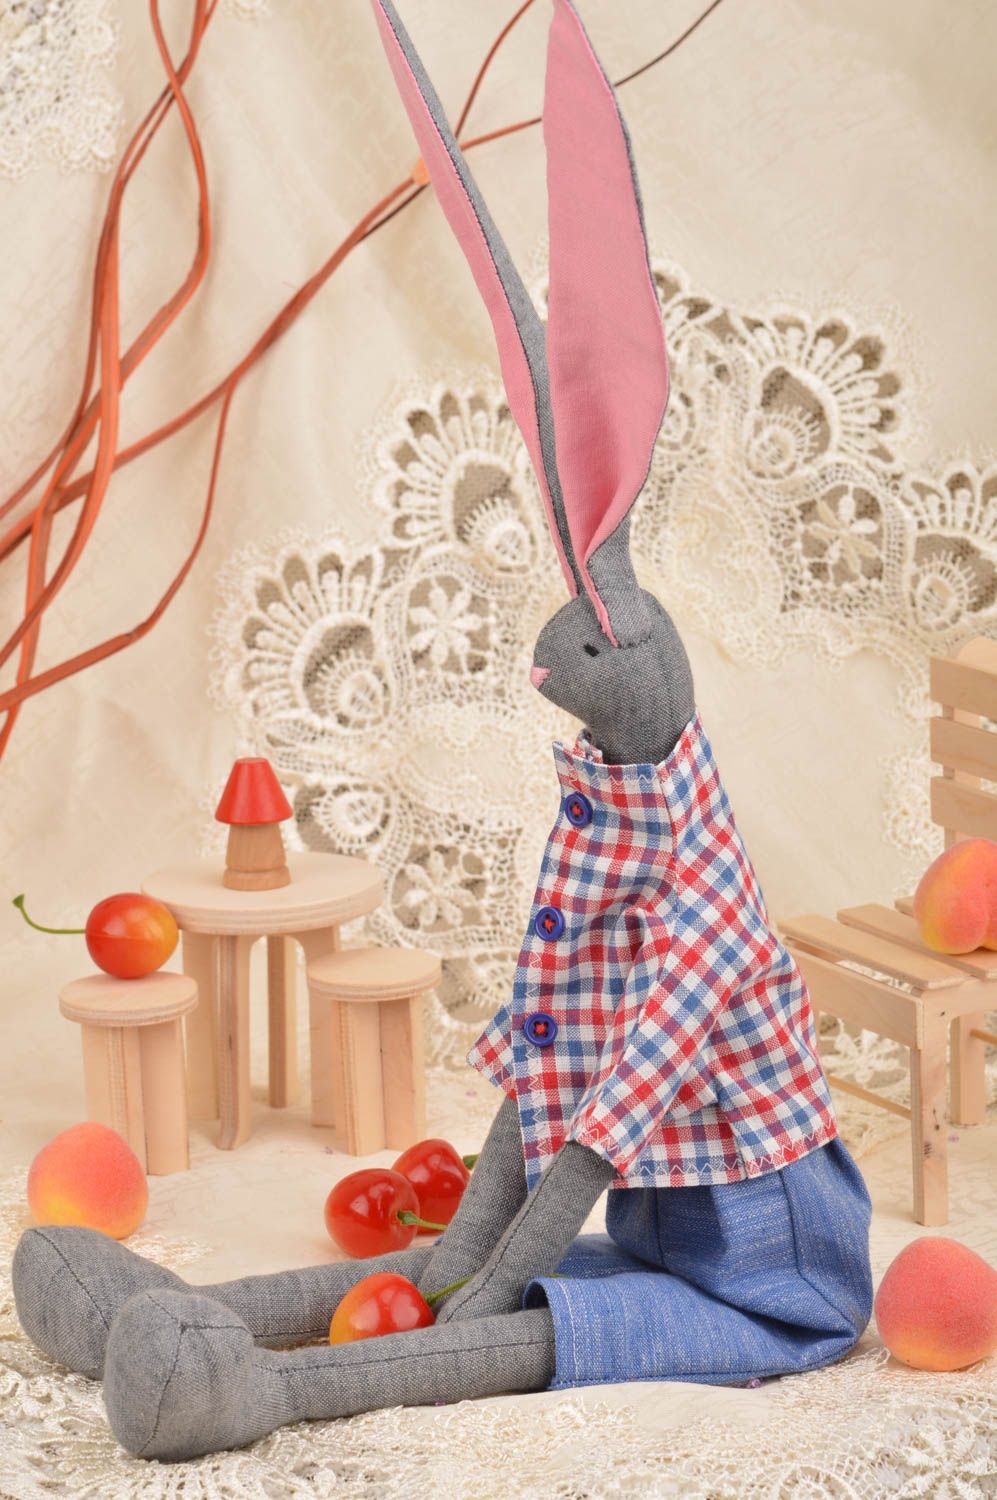 Unusual homemade fabric soft toy Hare for children and interior design photo 1